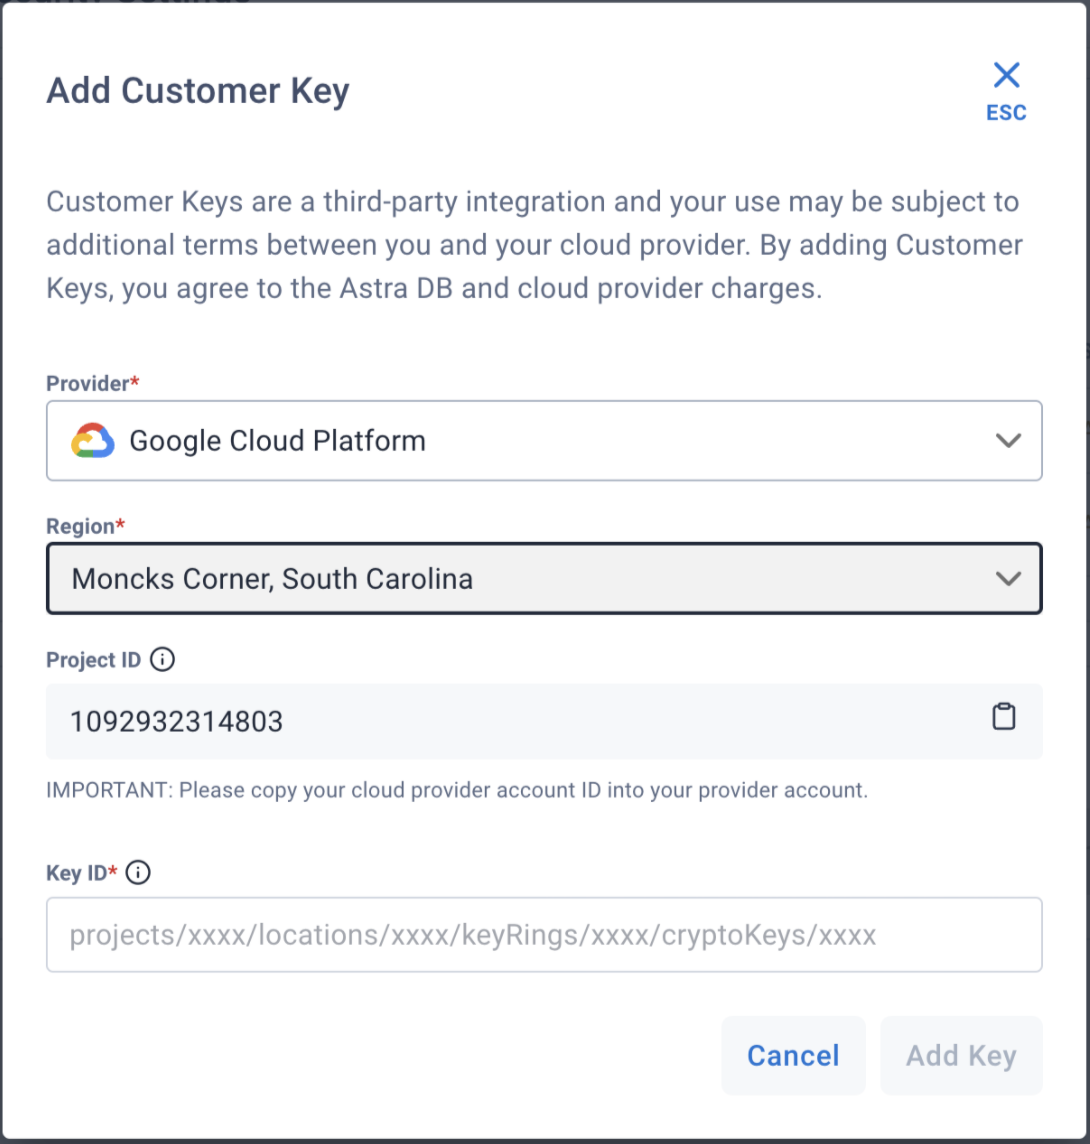 Add Key dialog with GCP provider and region selected.